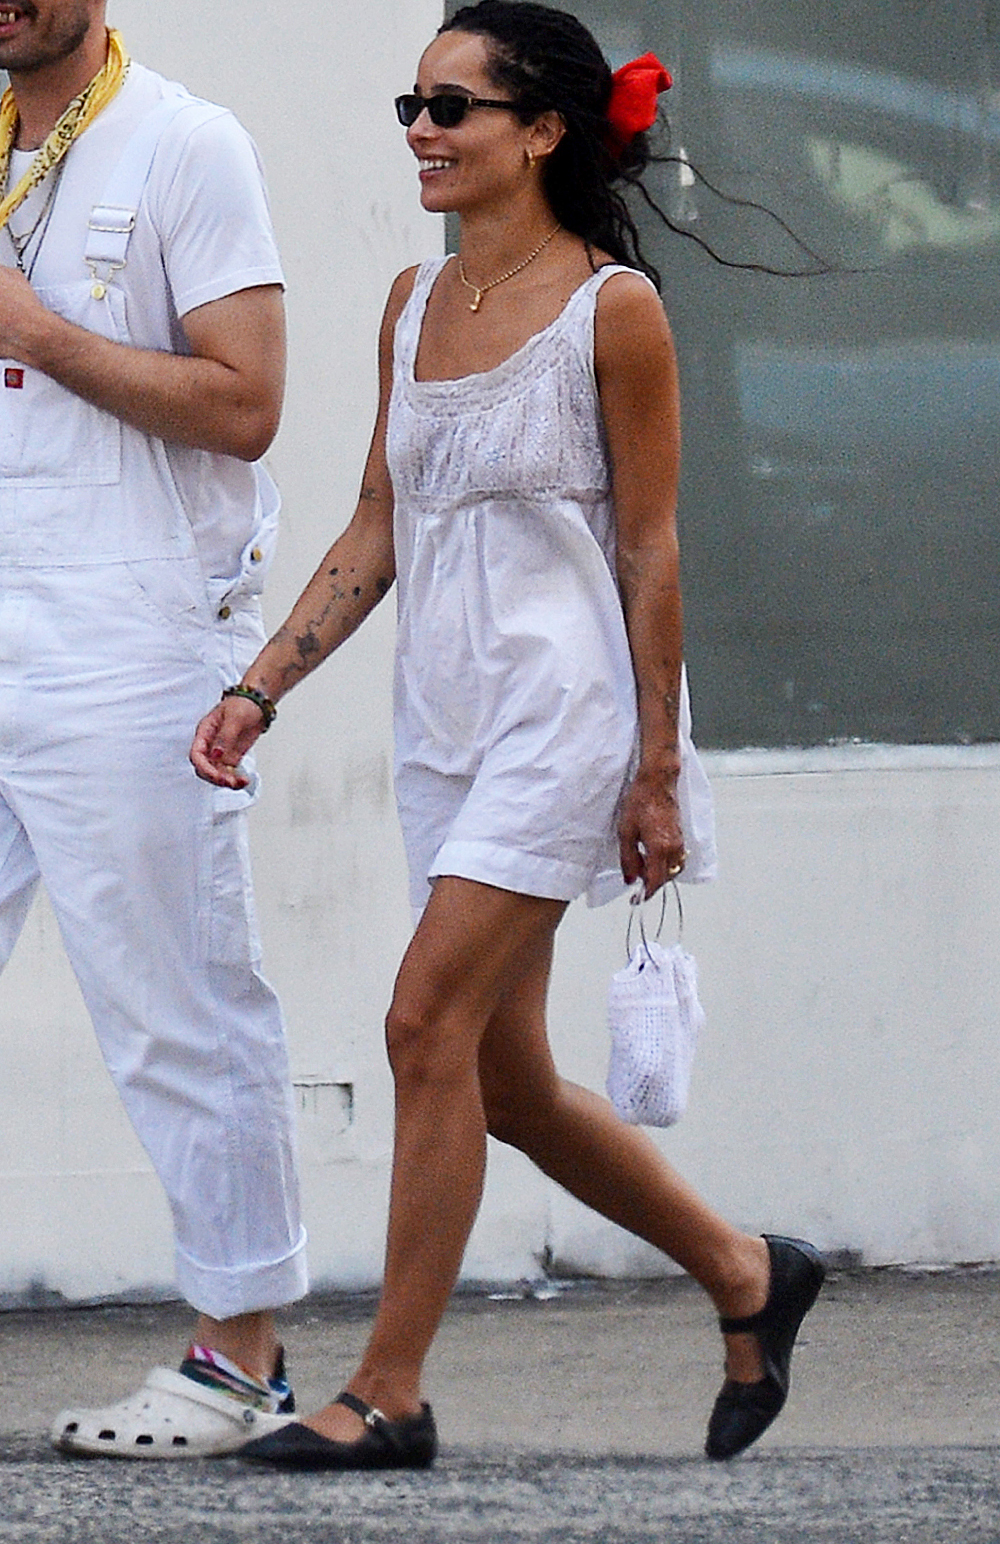 Another Day, Another Simple Zoë Kravitz Outfit I Just Can’t Fault